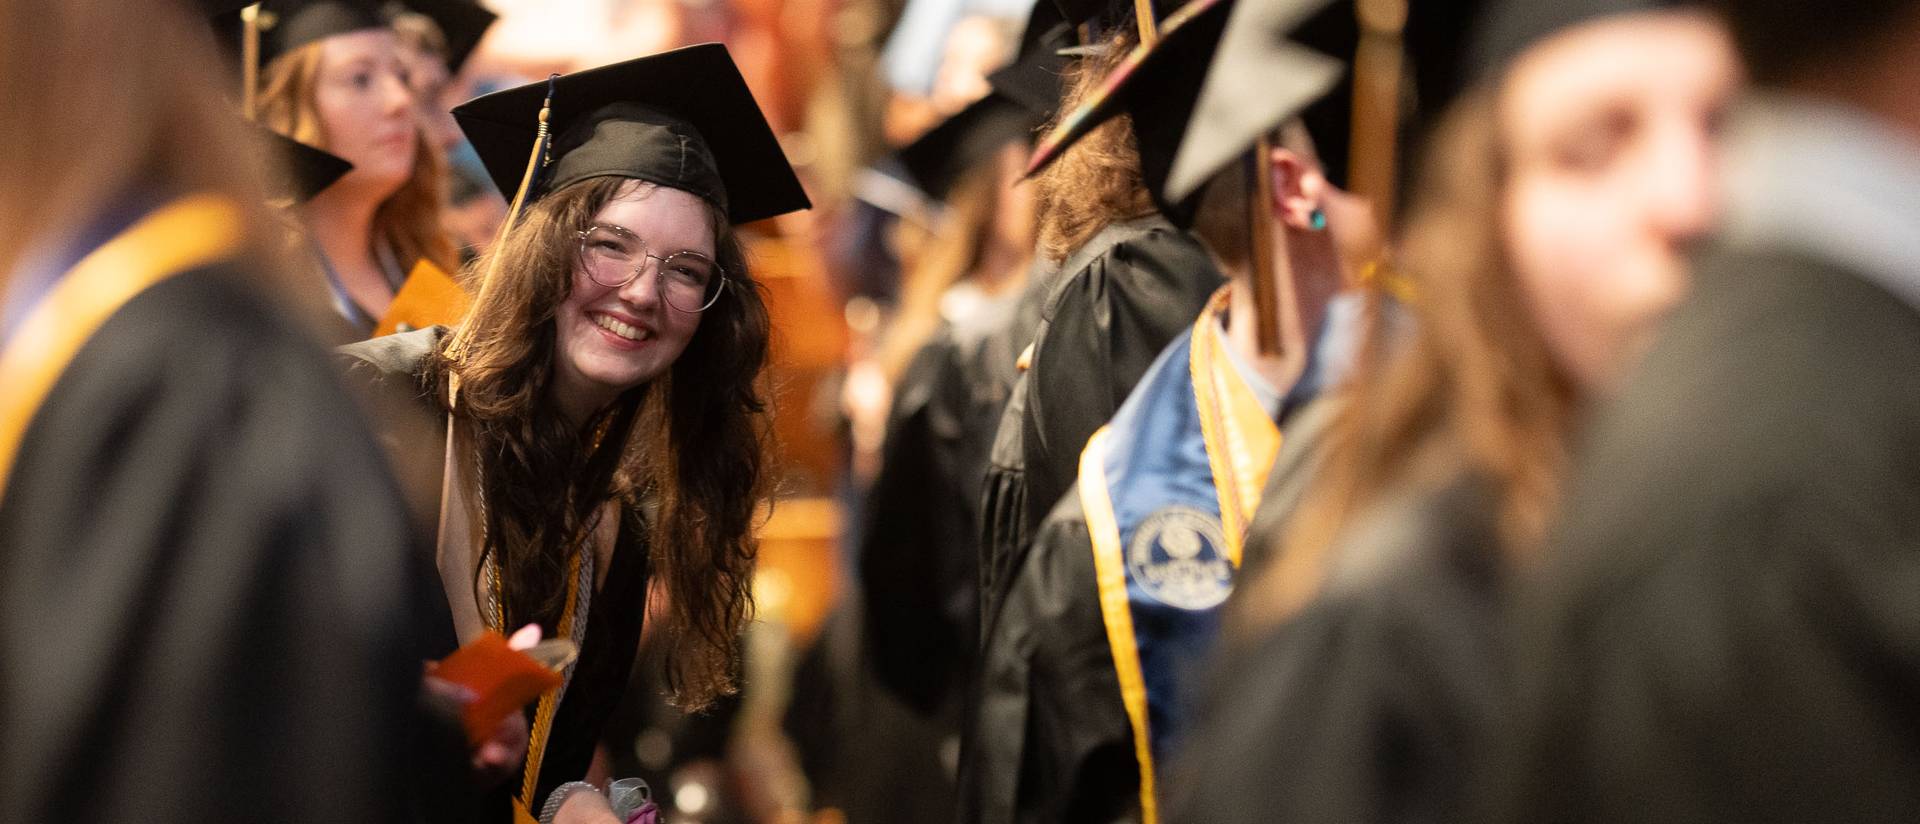 A graduate smiles at the camera between rows of graduates in caps and gowns.